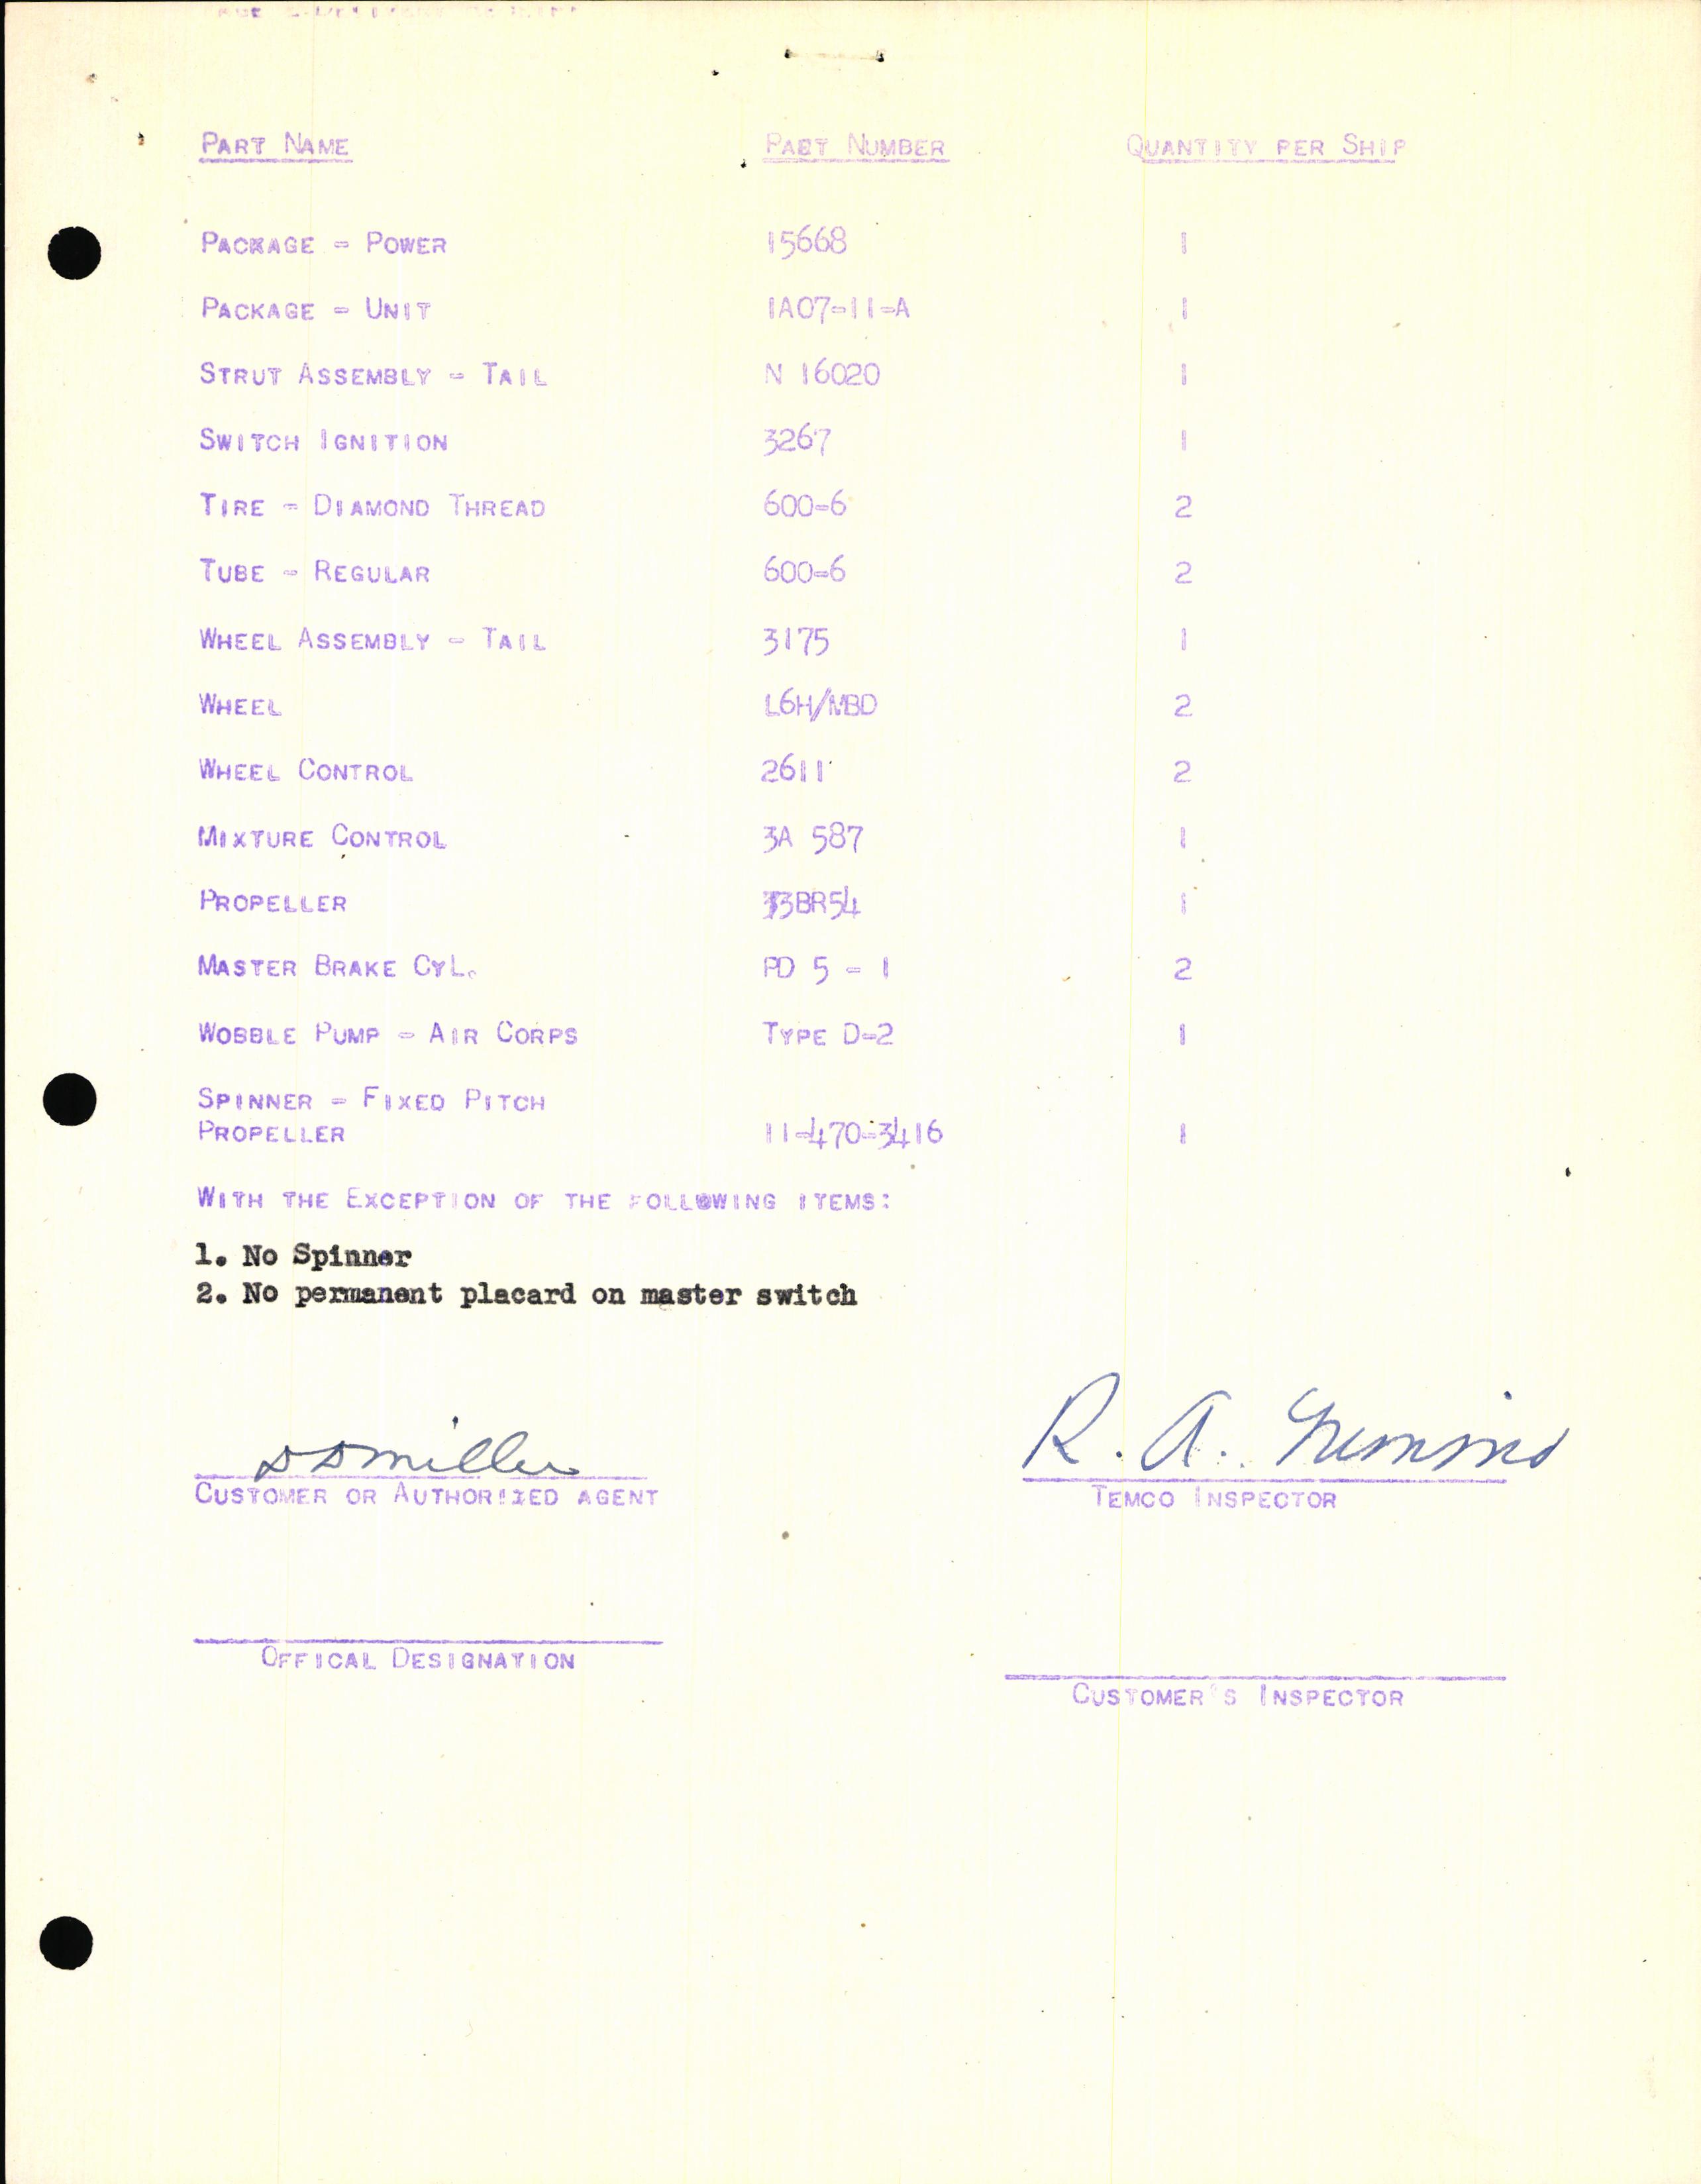 Sample page 3 from AirCorps Library document: Technical Information for Serial Number 2194